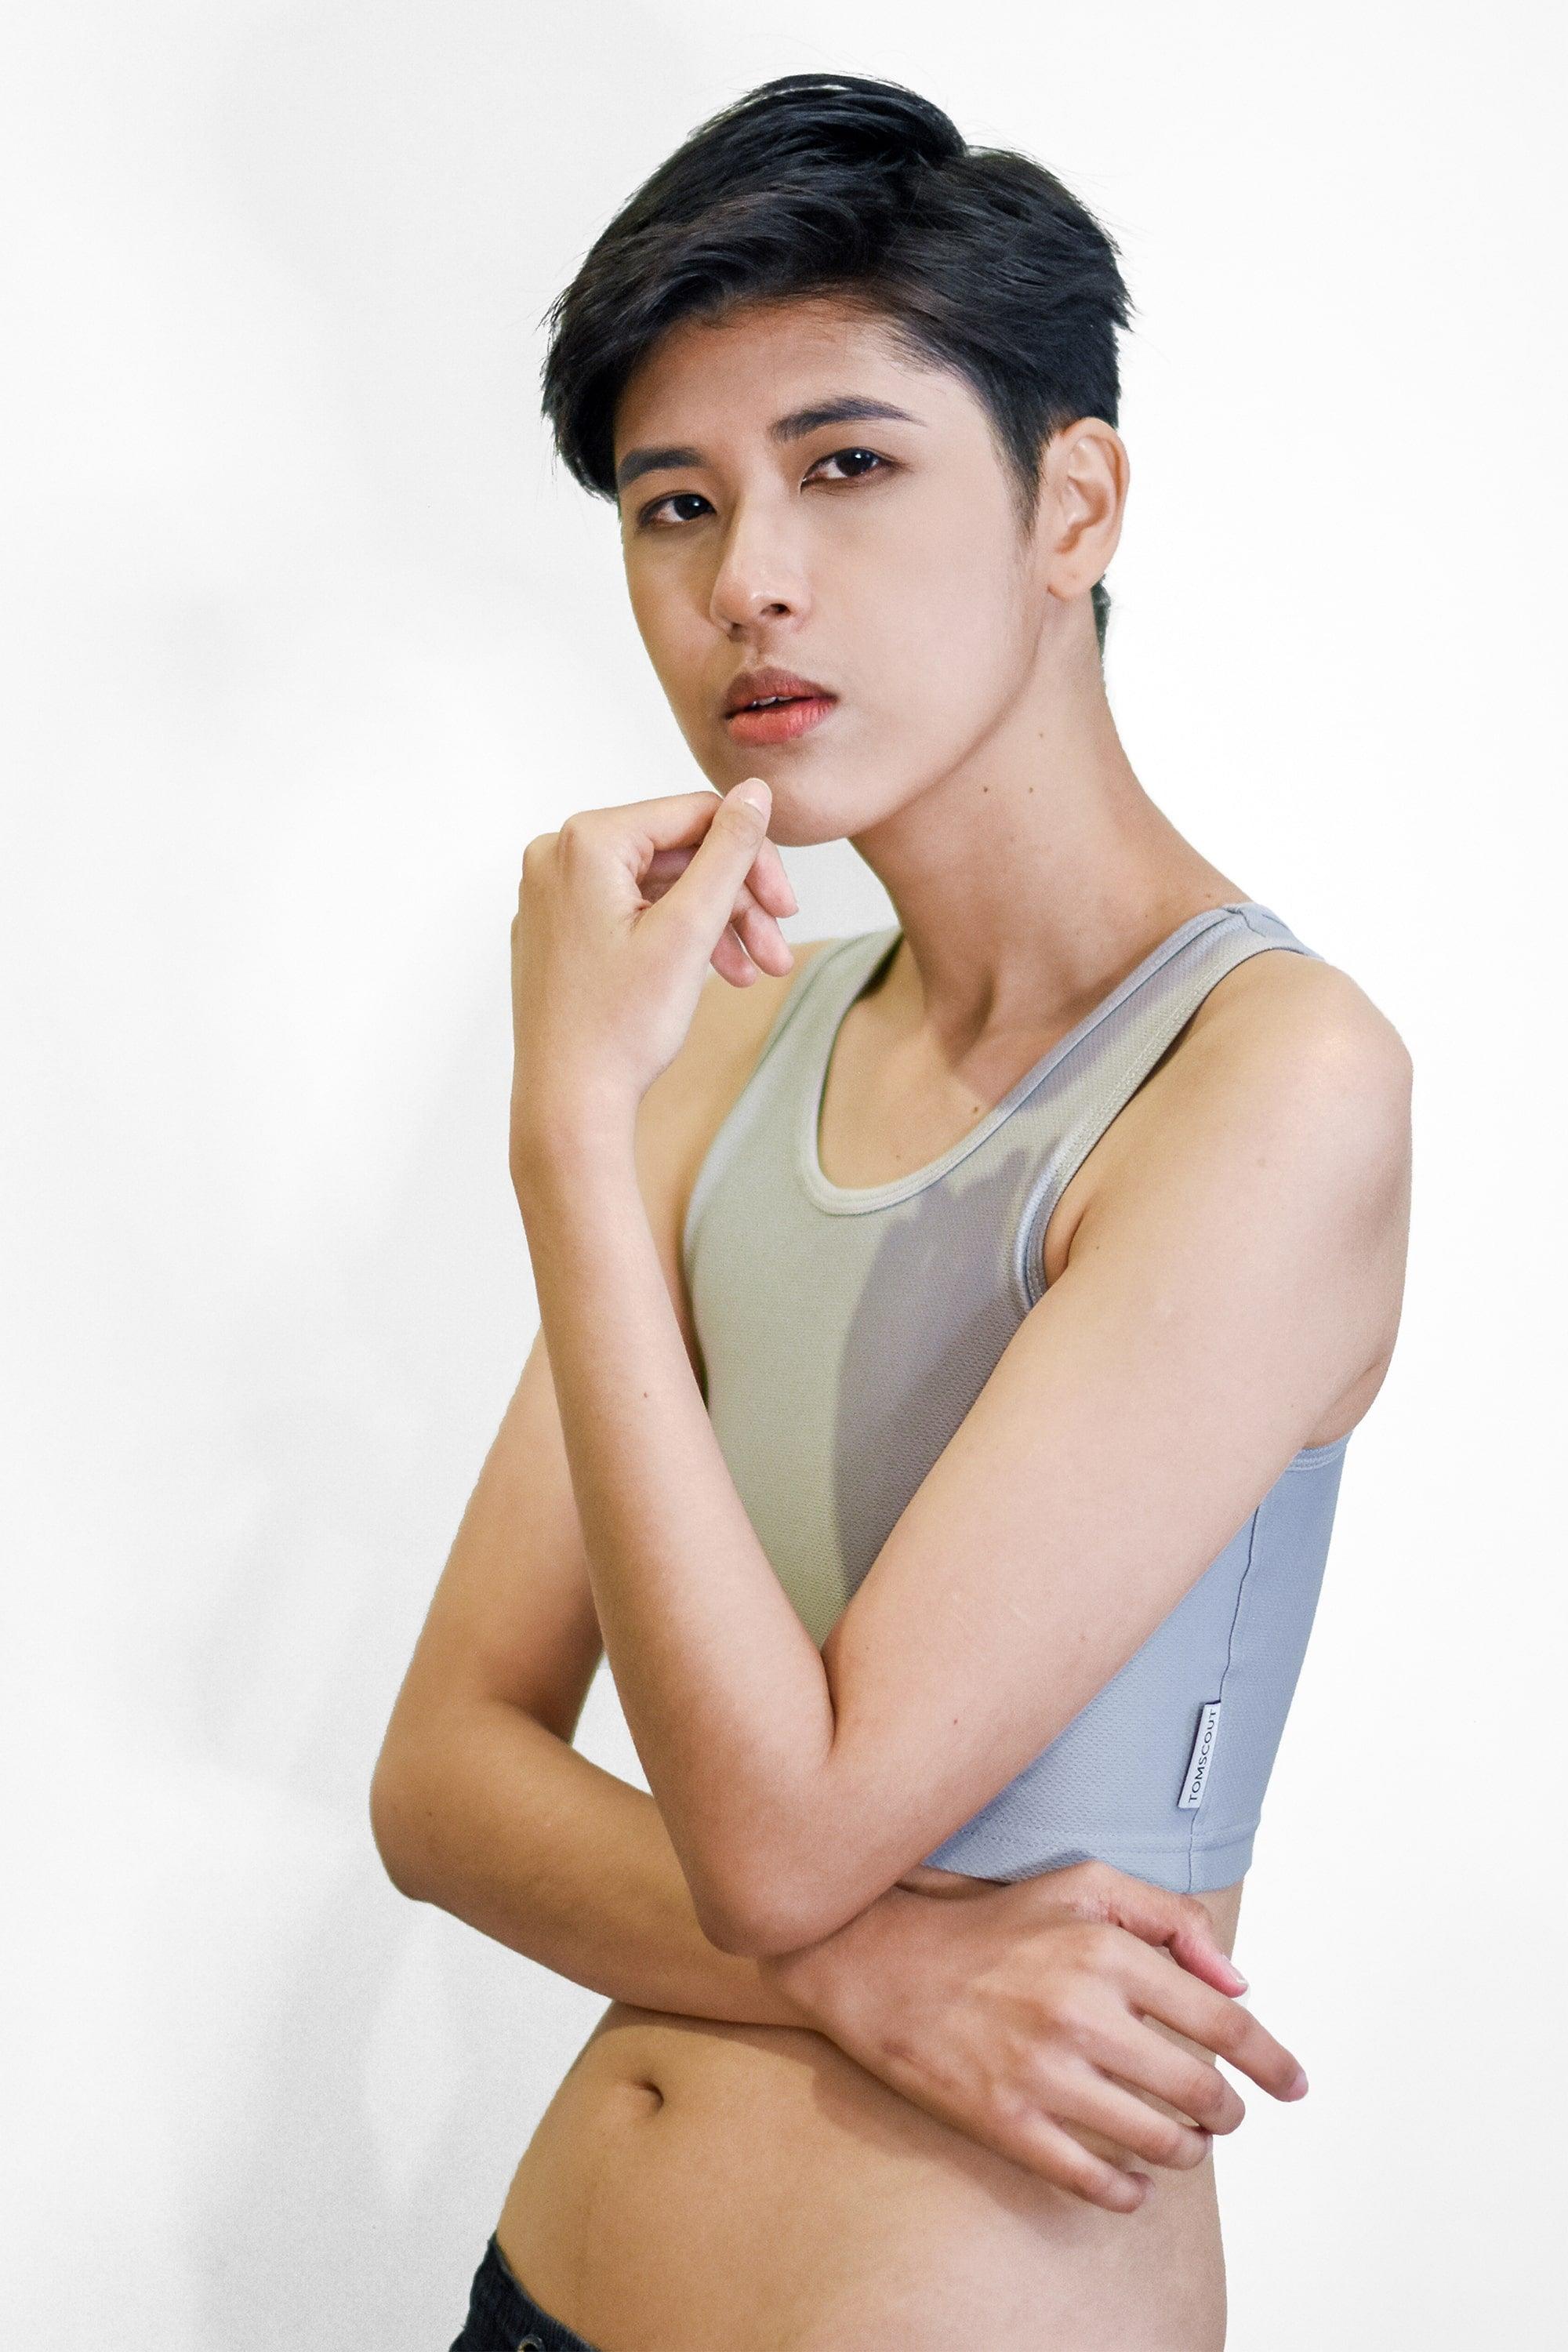 Non-binary Tomboy in a grey color non-bandage TOMSCOUT Chest Binder, part of the TOMSCOUT ACTIVE BINDER collection, showcasing a clearance binder that's affordable yet high quality.